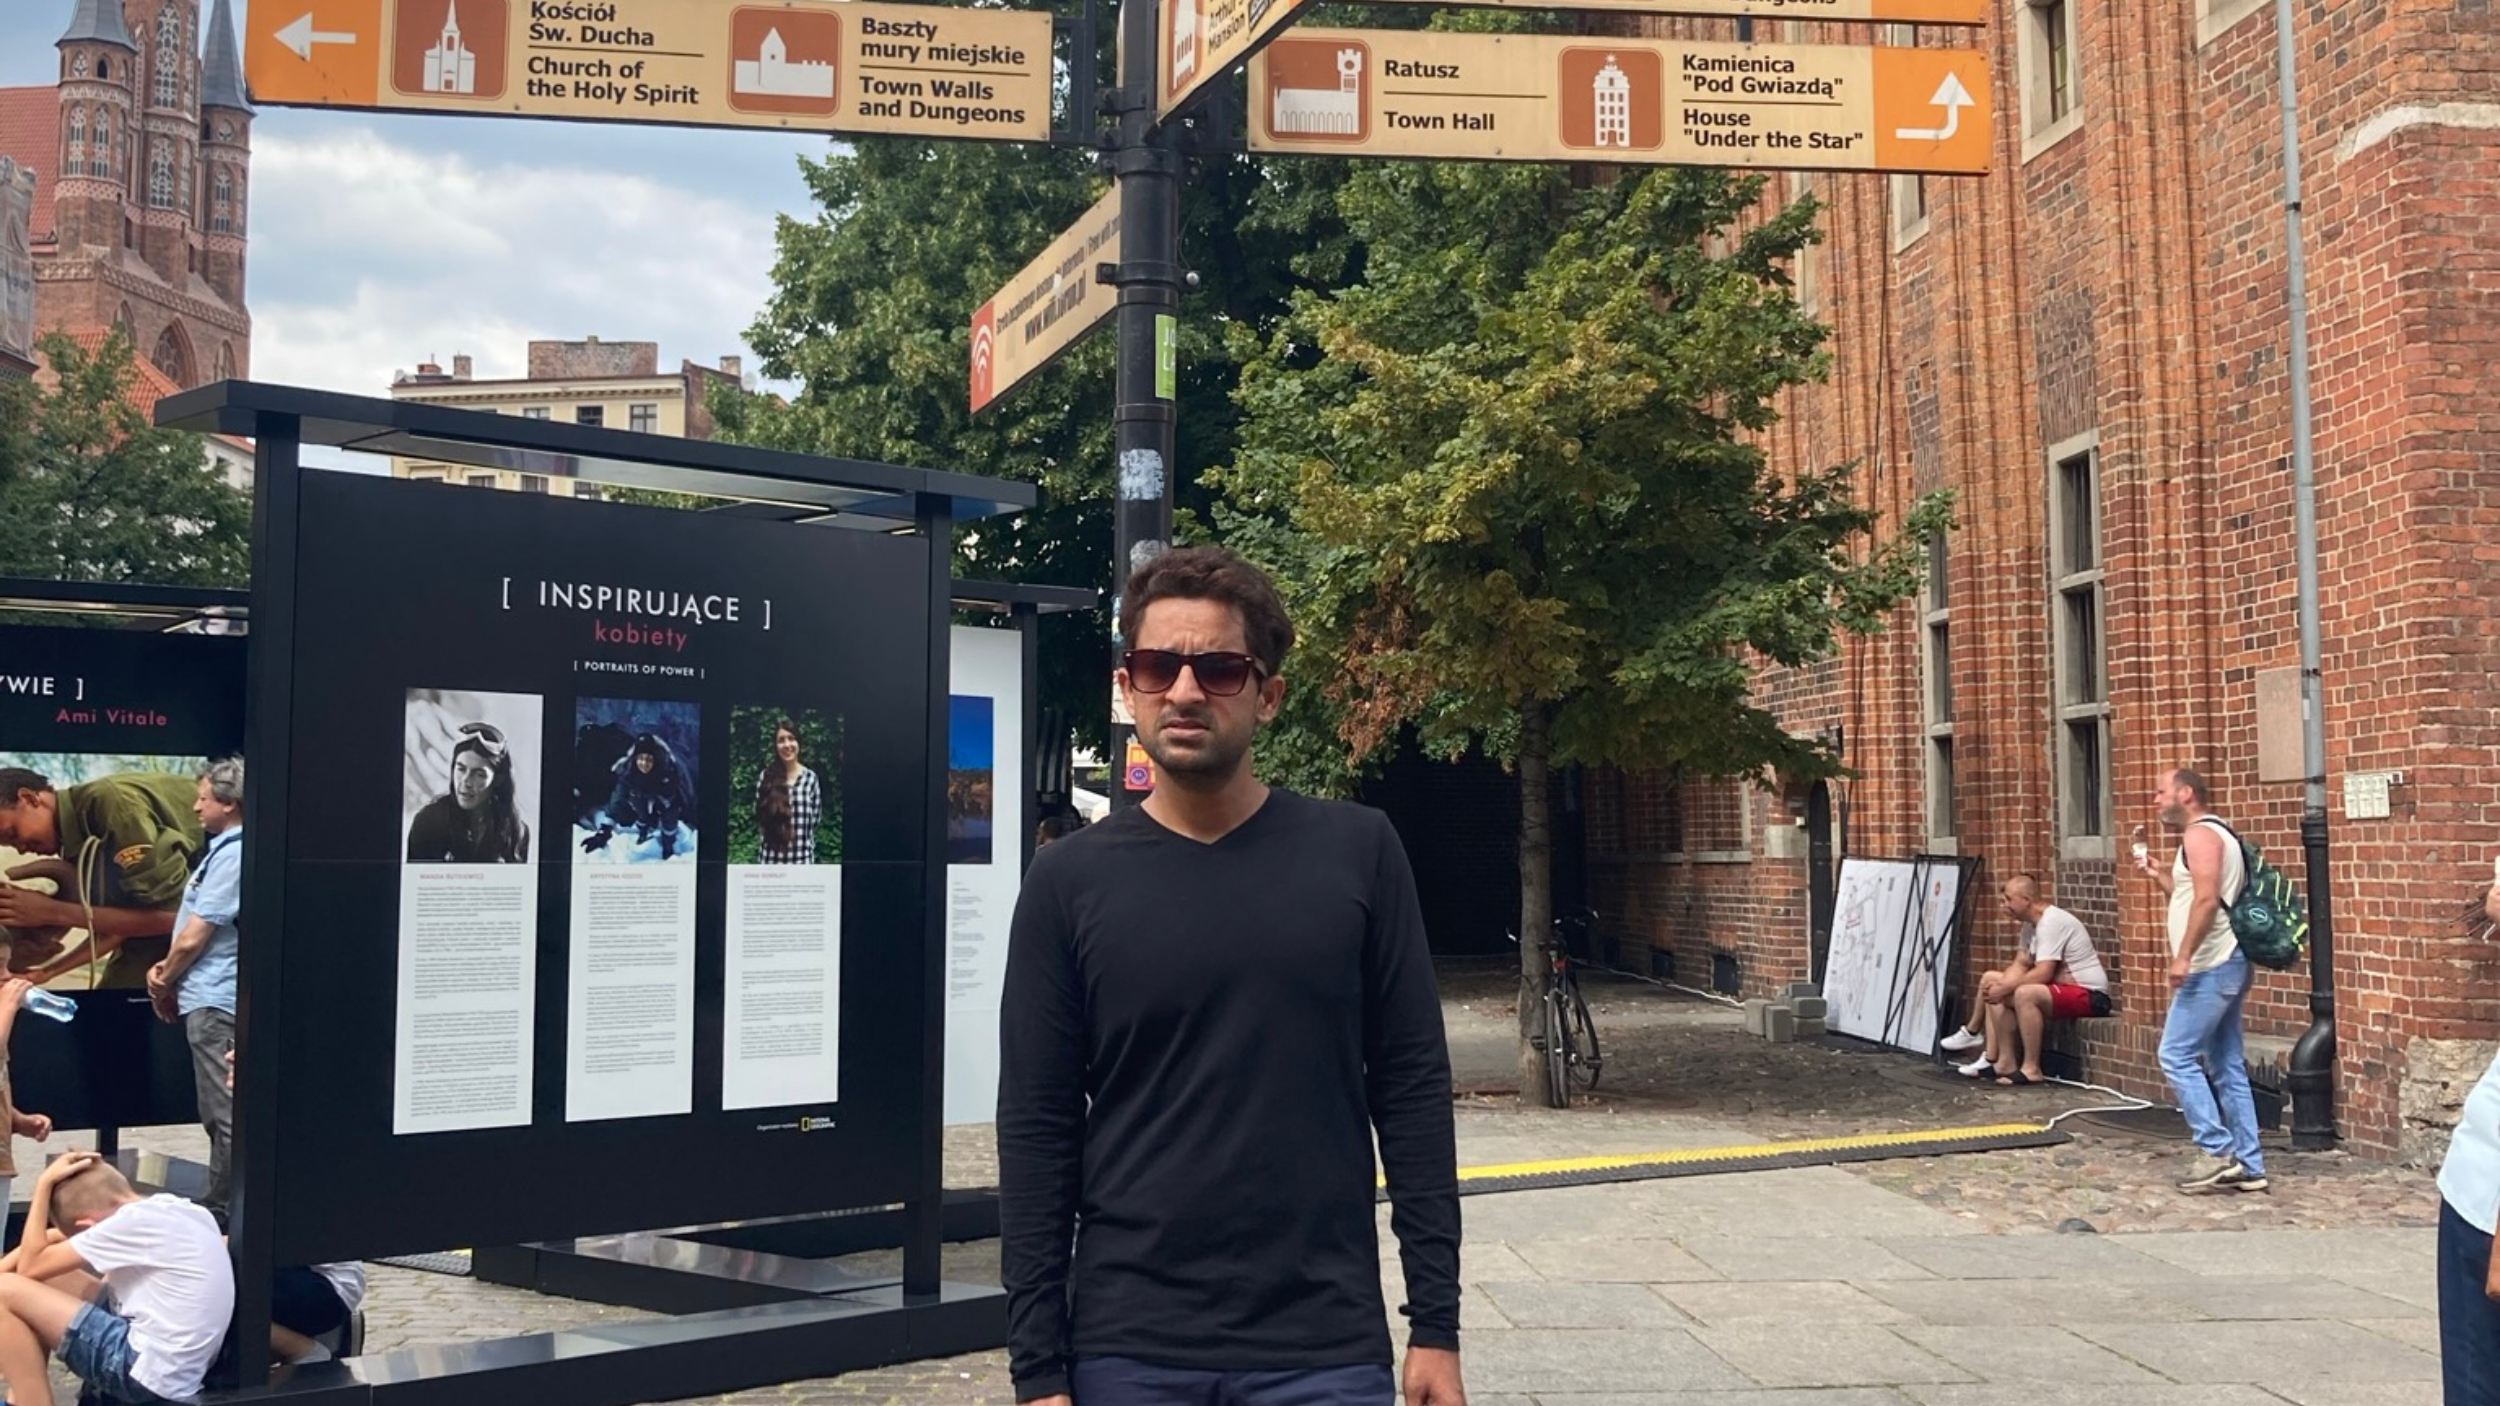 Srikant, wearing a dark shirt and sunglasses, standing in front of a street sign in Gdansk.